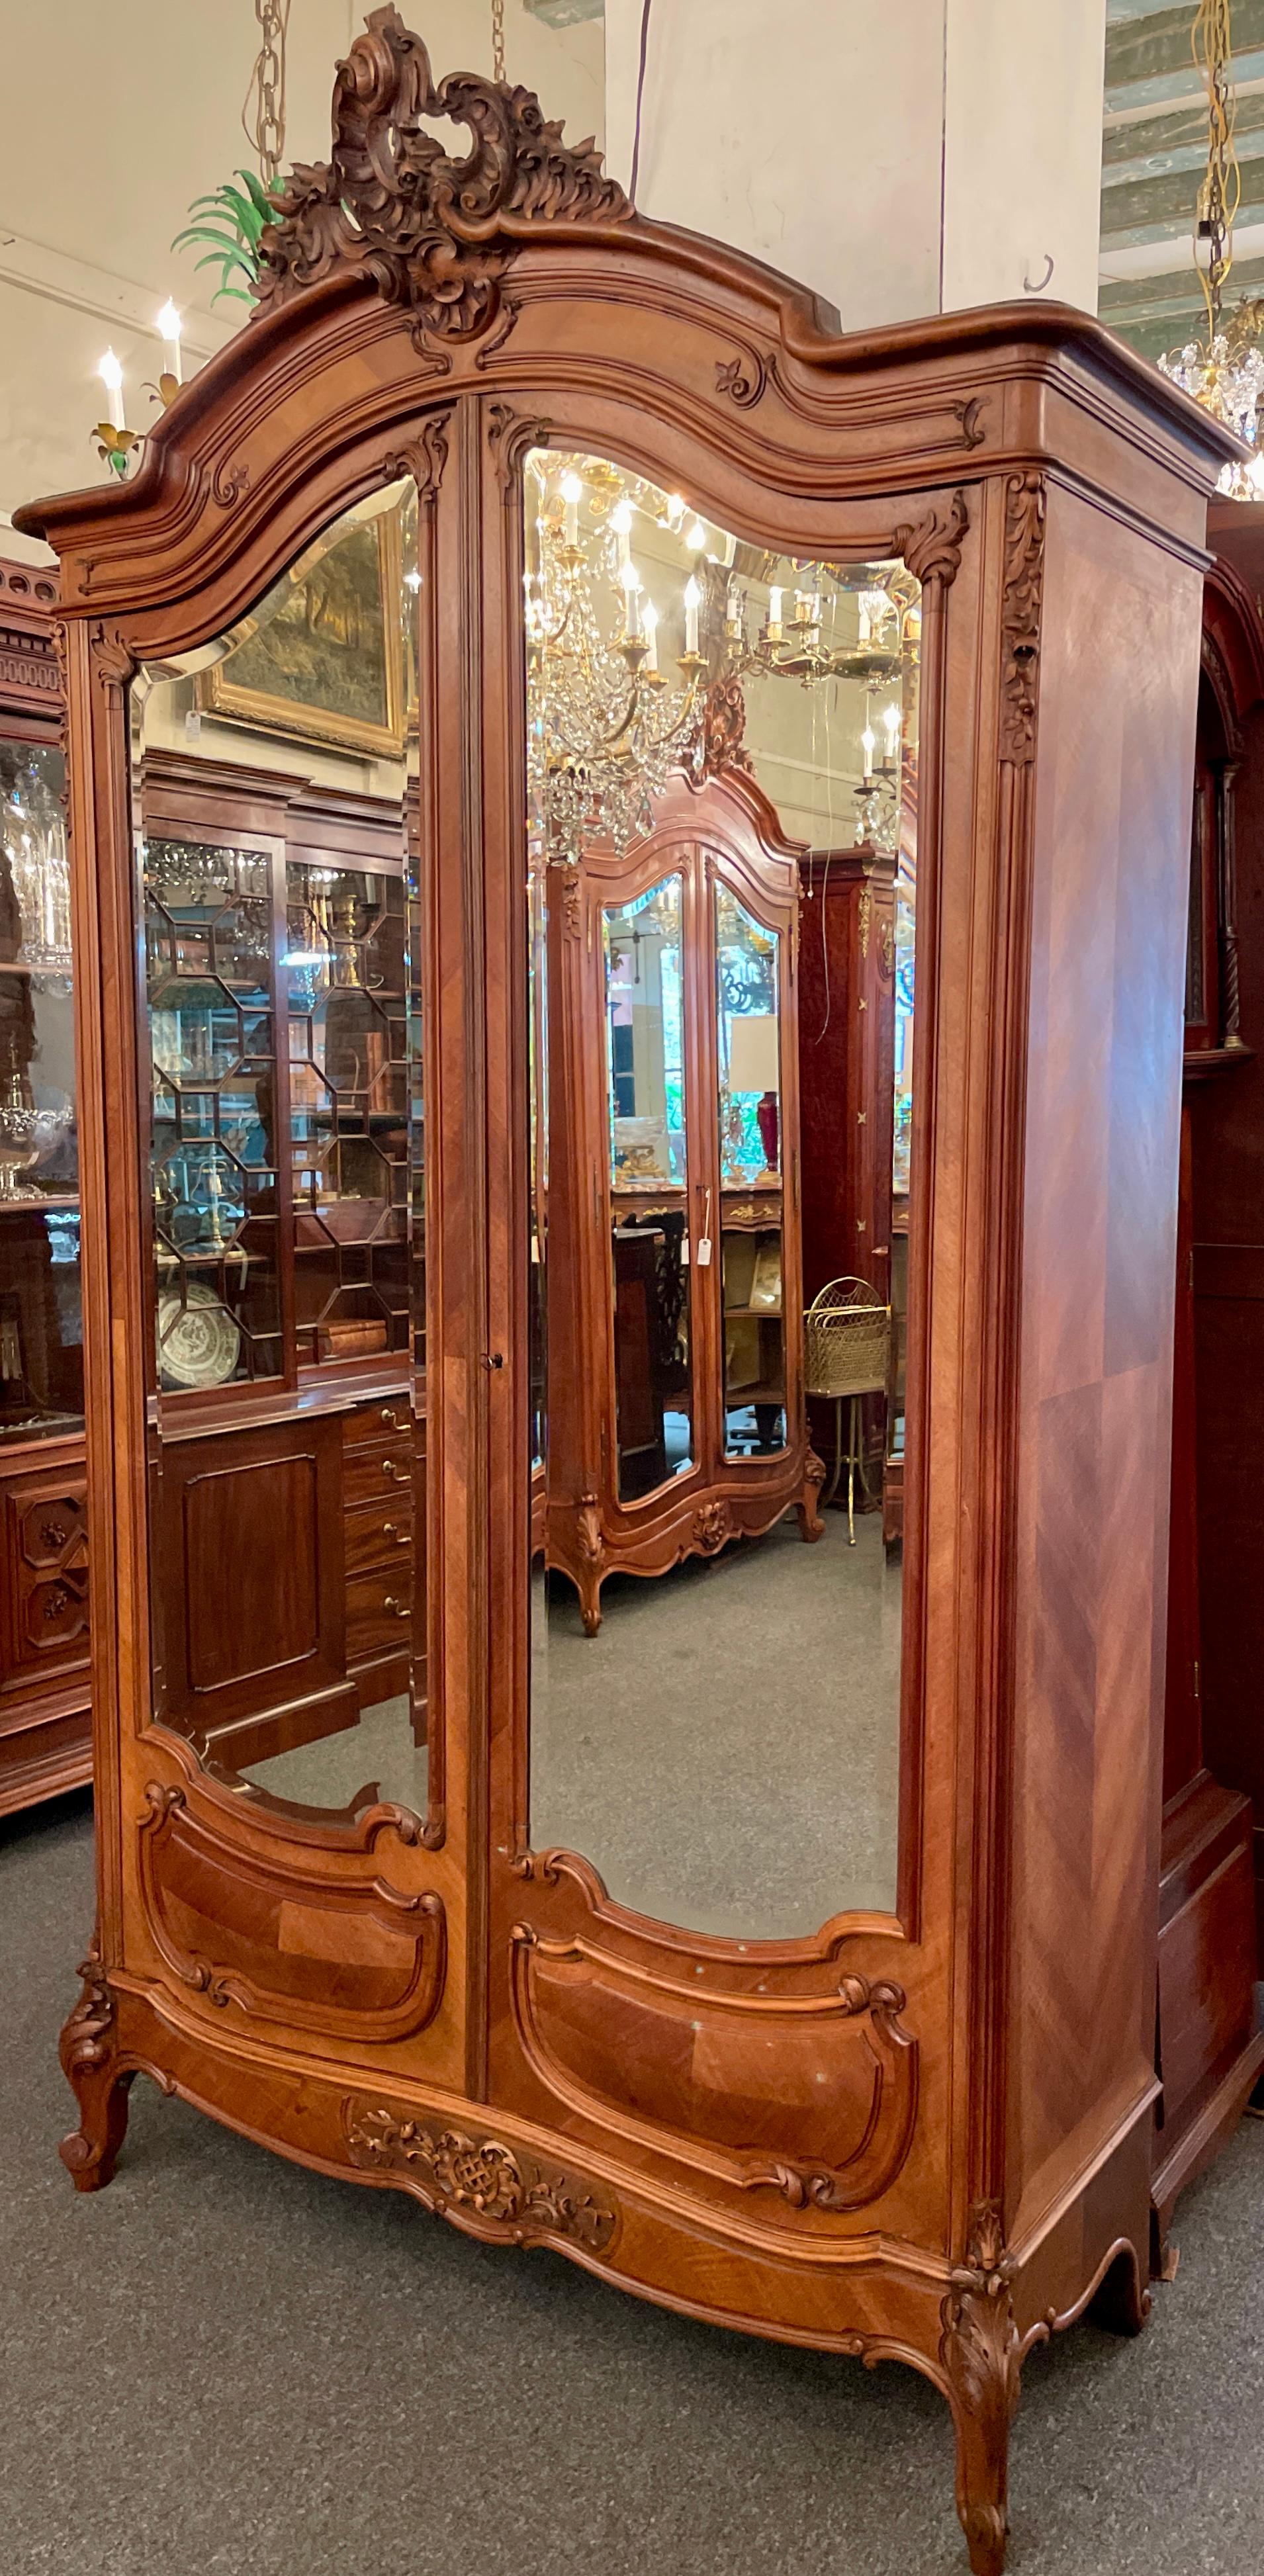 Antique French Louis XV Style Carved walnut 2 door armoire with Original Curve-Line Beveled Mirrors. Beautiful Fitted Interior.